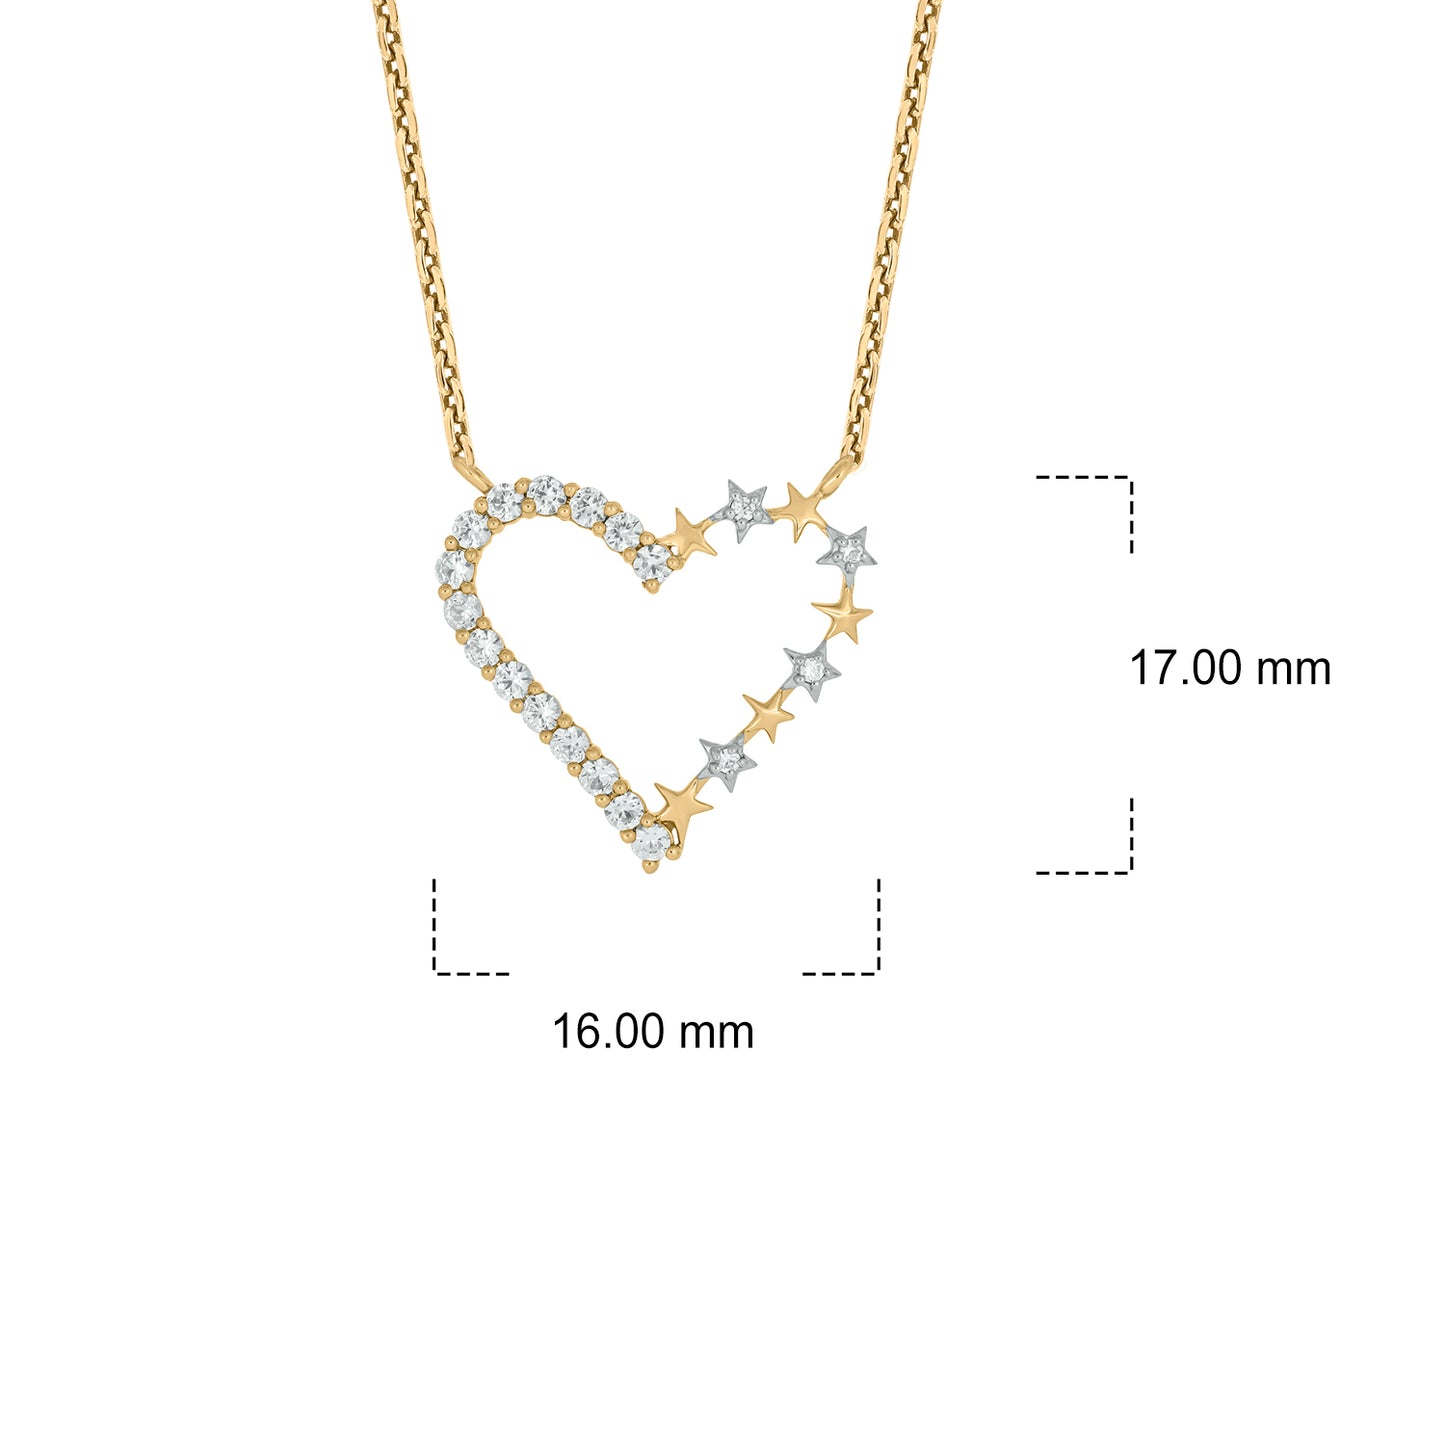 Unique Star Studded Heart Diamond Necklace in 925 Sterling Silver